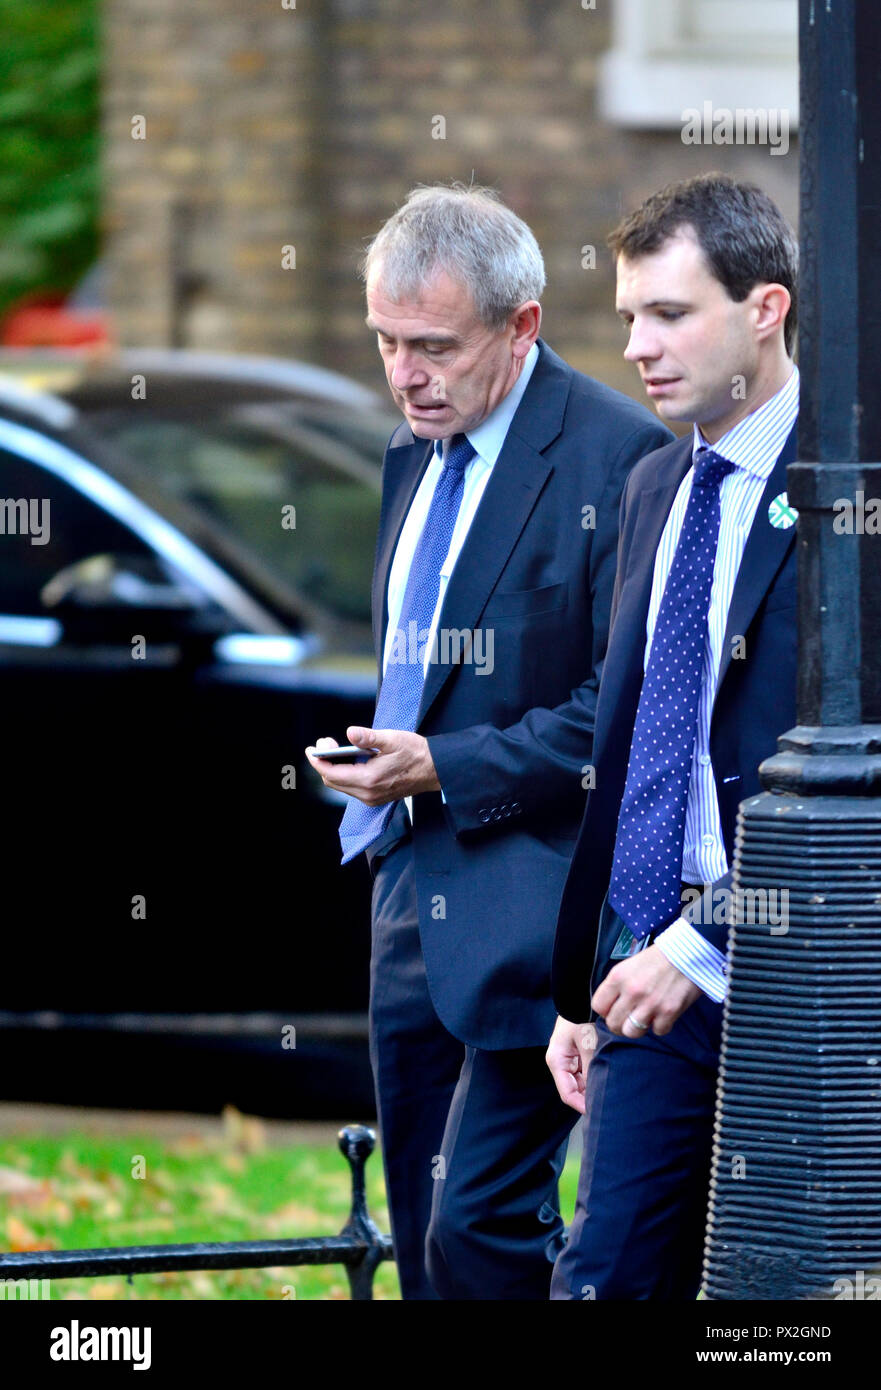 Robert Goodwill MP (Minister for Children and Families - left) arriving during a lengthy cabinet meeting to discus Brexit, Downing Street 16th October Stock Photo